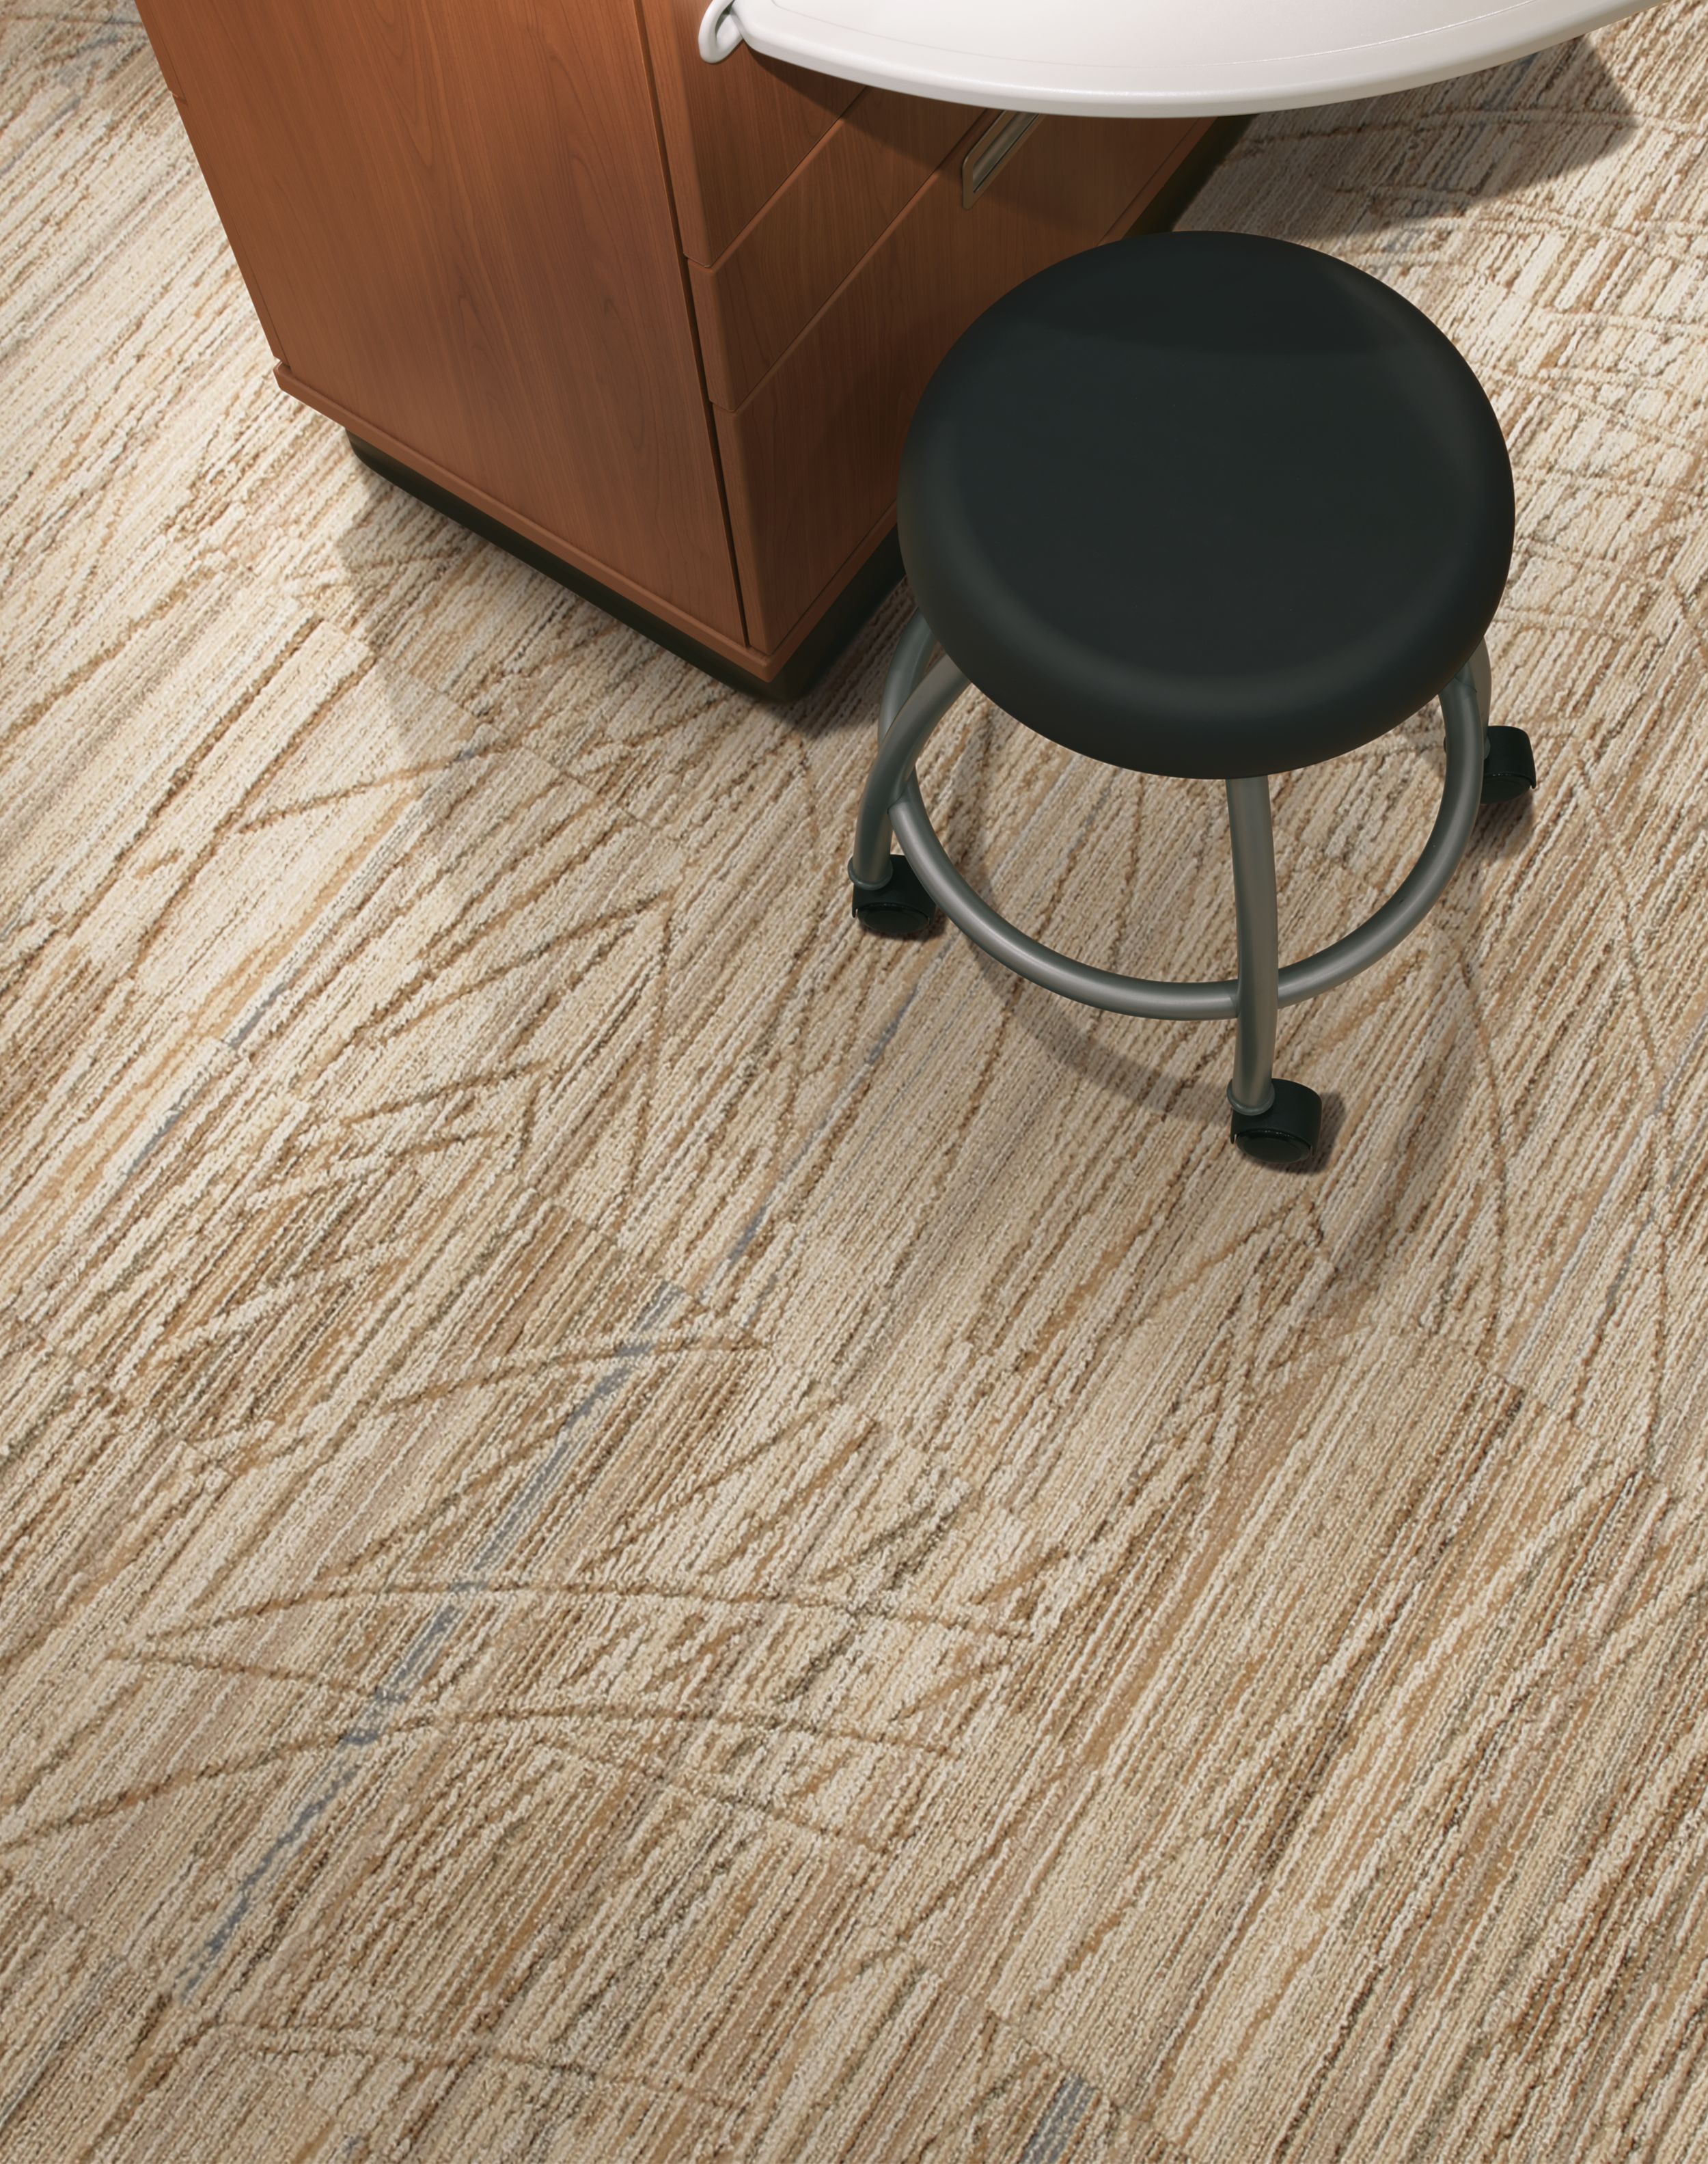 Interface Prairie Grass carpet tile in close up view with stool and cabinet imagen número 2